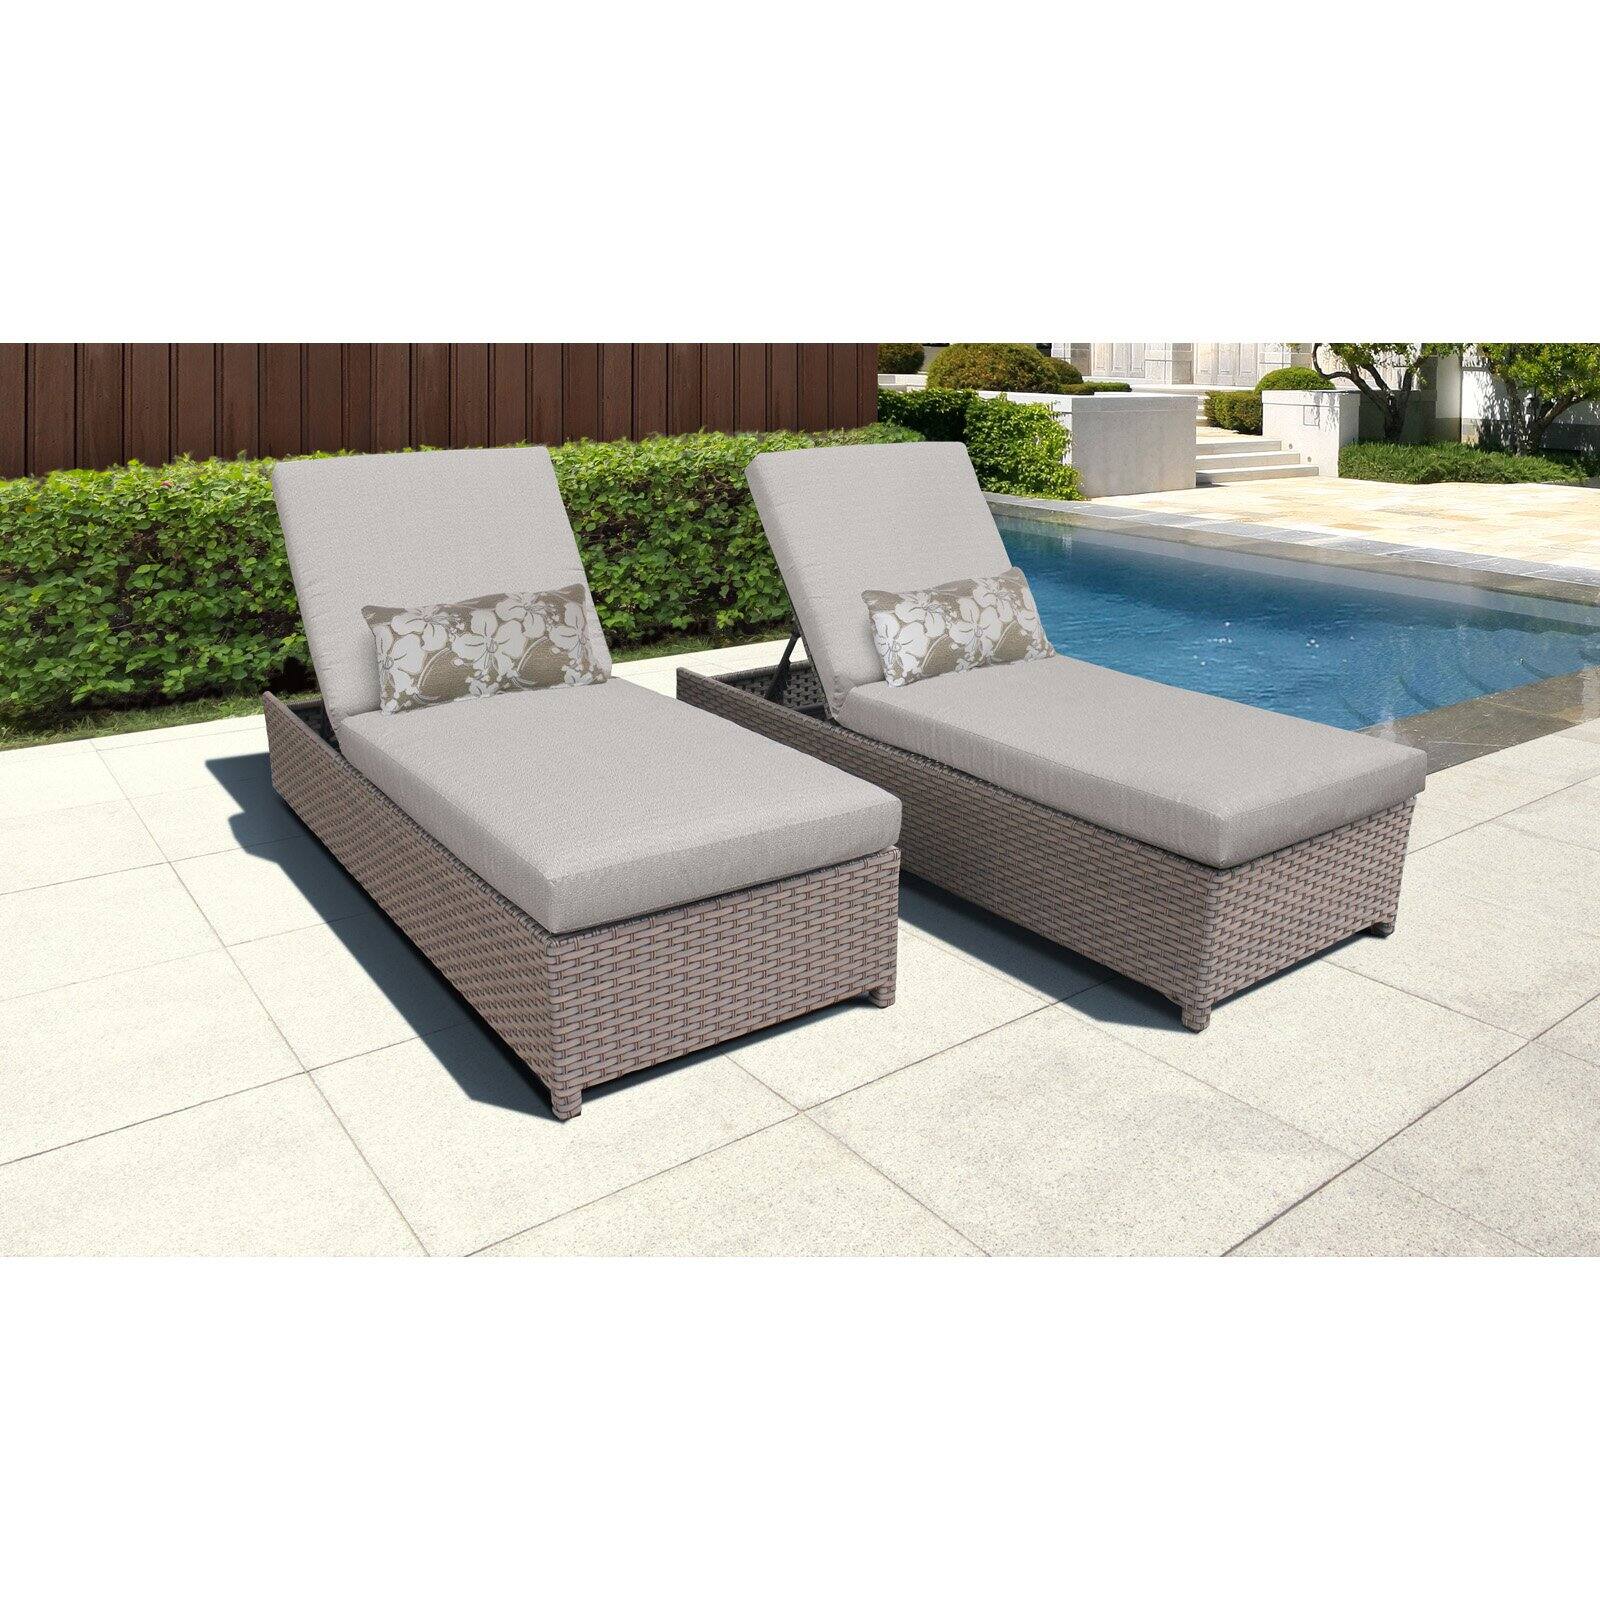 TK Classics Florence Wheeled Wicker Outdoor Chaise Lounge Chair - Set of 2 - image 4 of 11